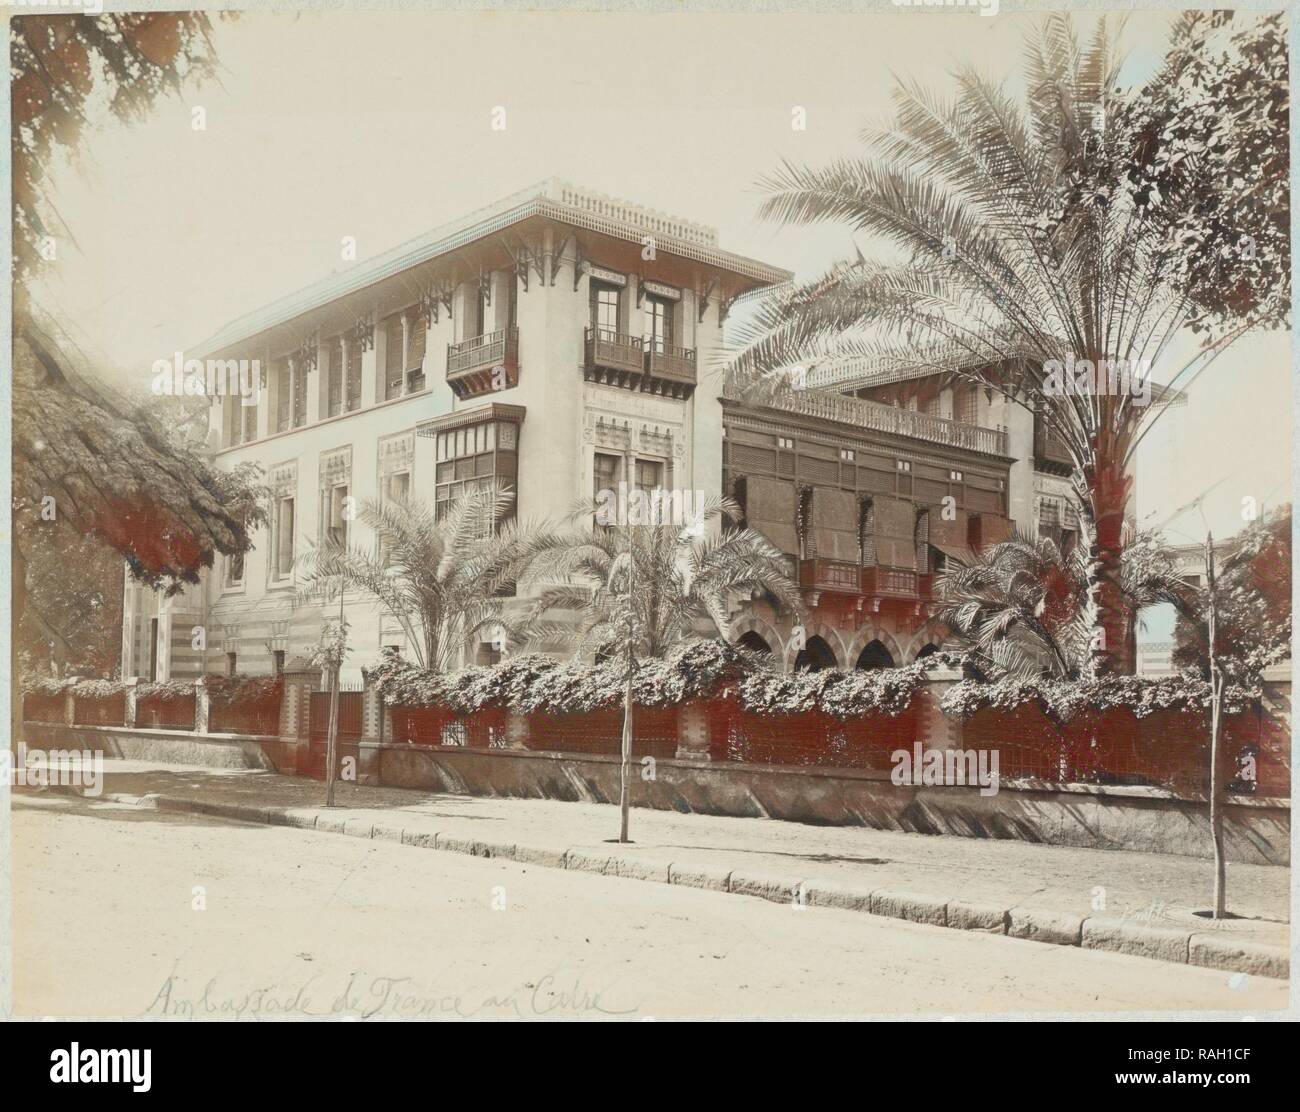 Ambassade de France au Caire, Basse Egypte Janvier 1906, Travel albums from Paul Fleury's trips to Switzerland, the reimagined Stock Photo